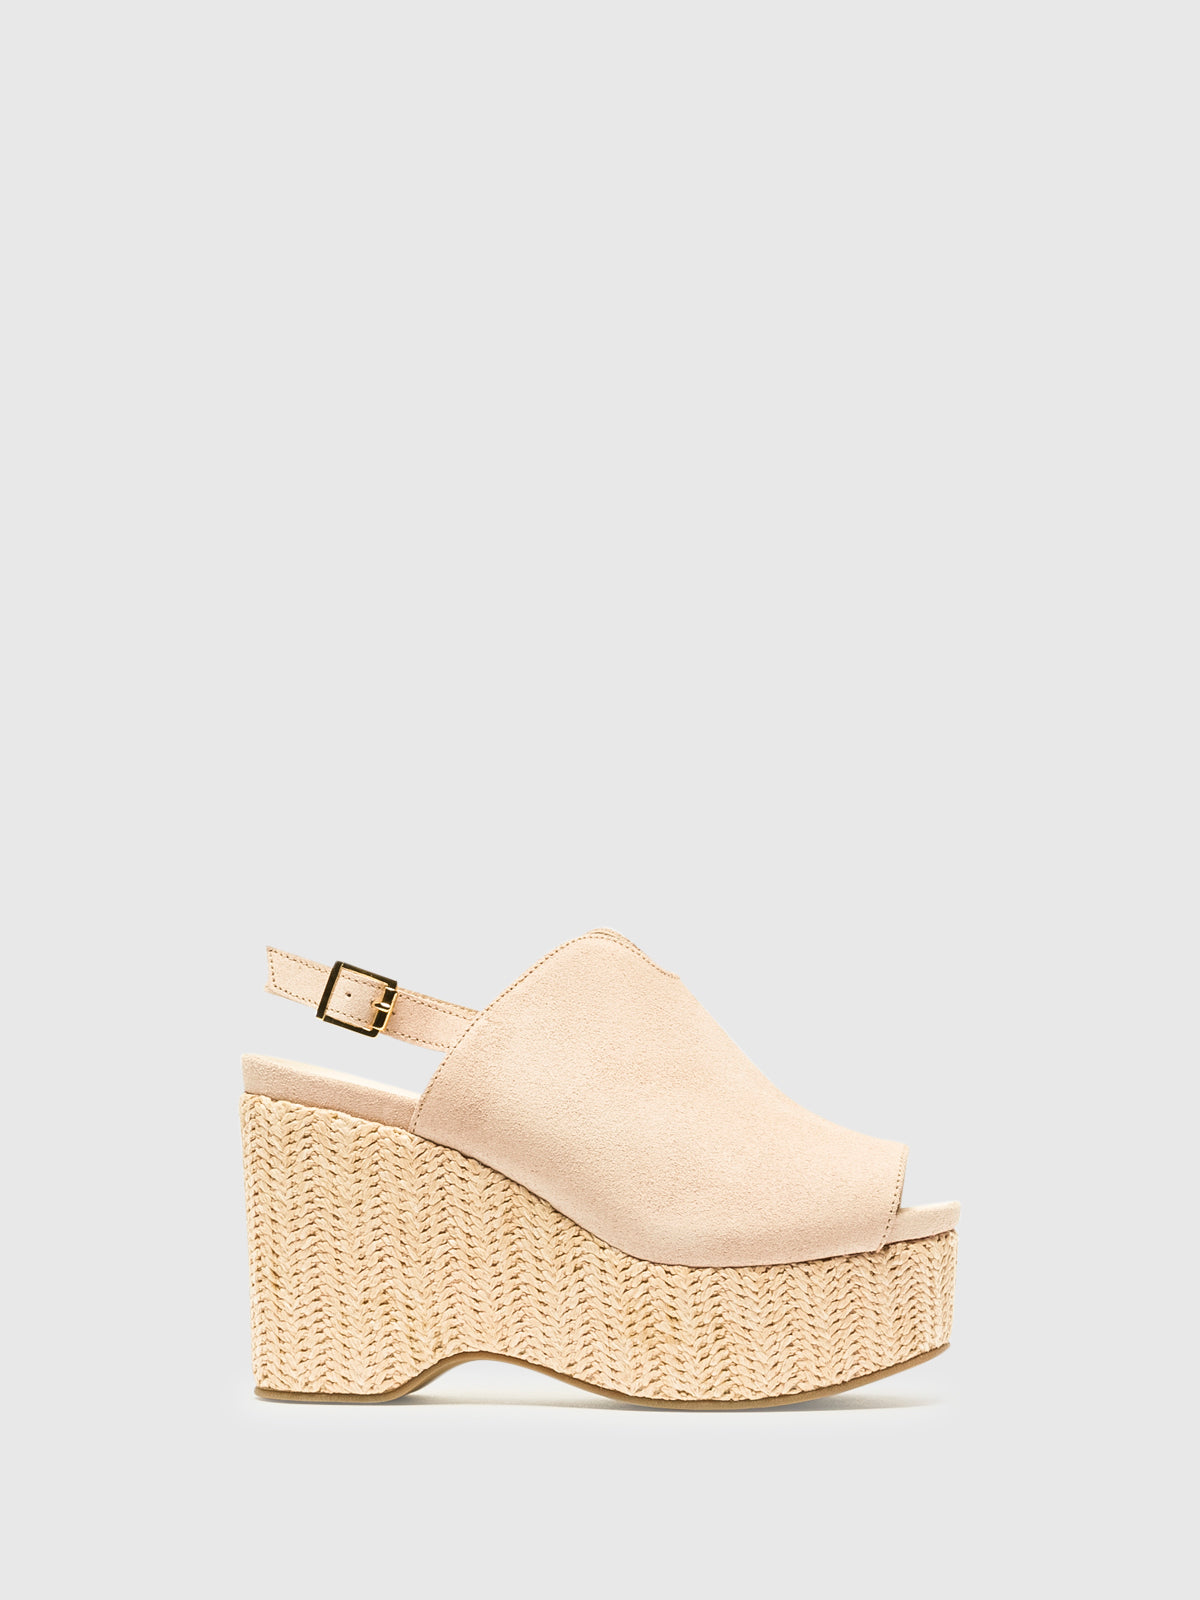 Foreva Pink Wedge Mules